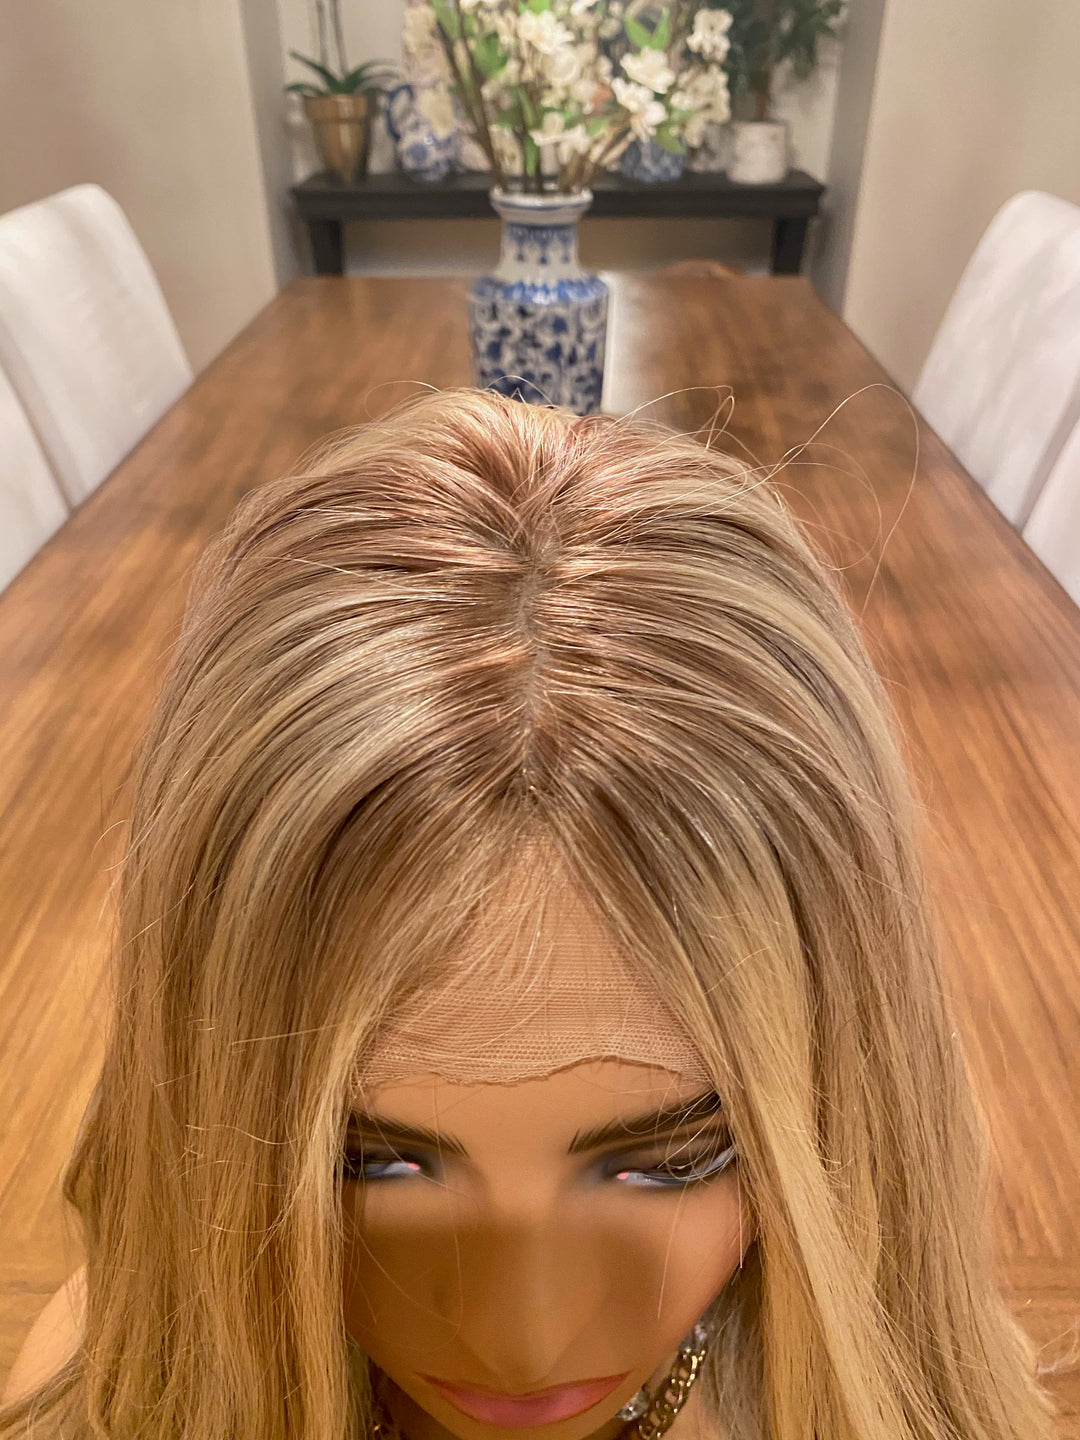 ARIANNA - Dimensional Blonde Lace Top Wig